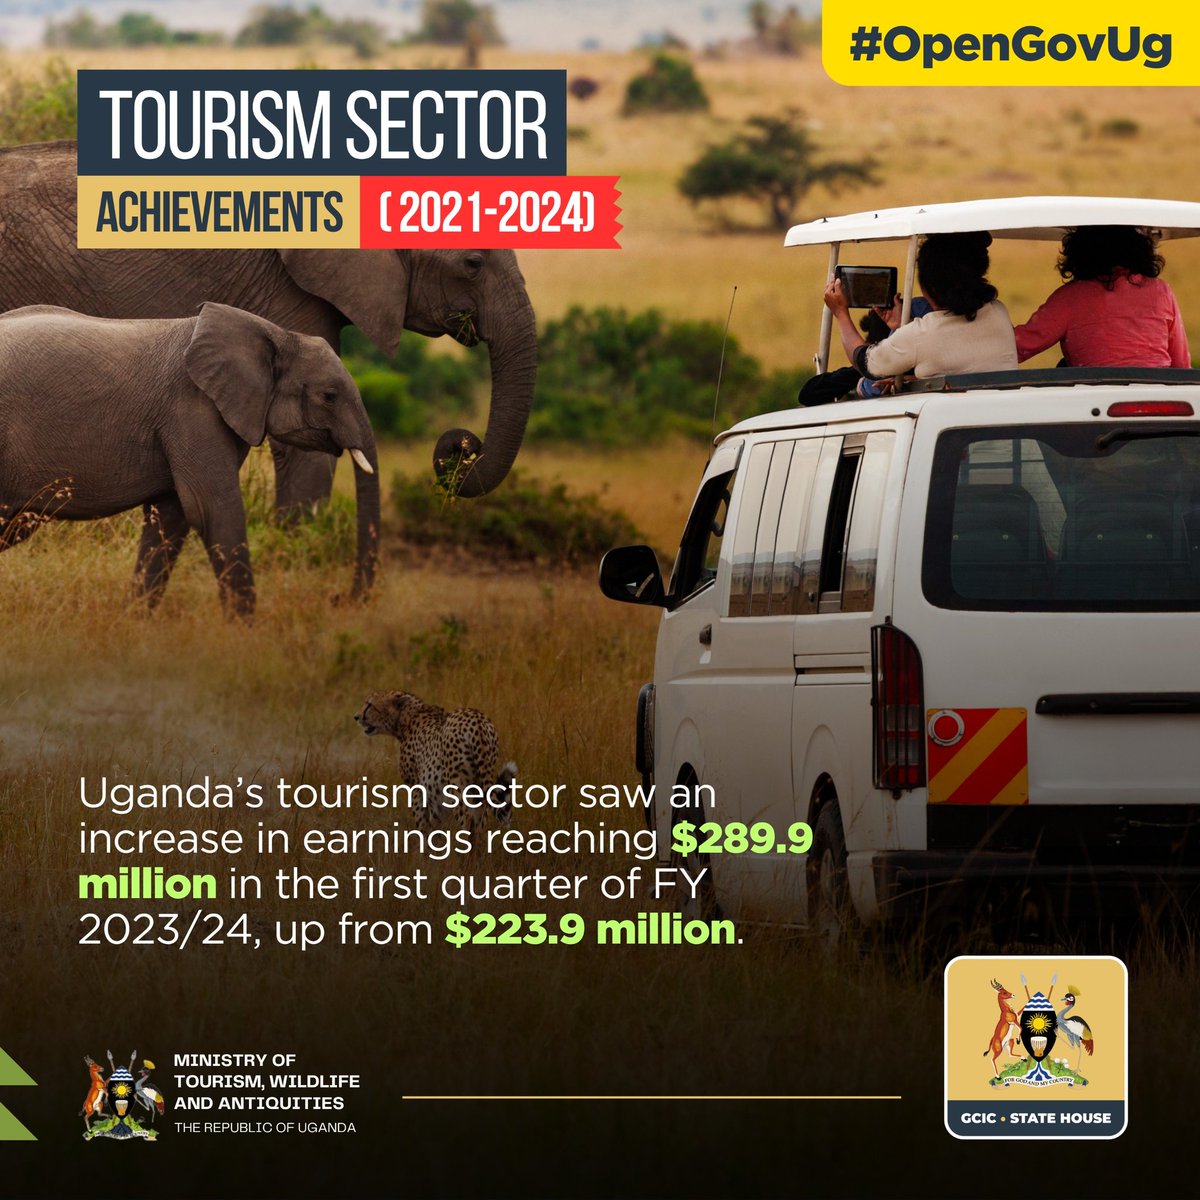 Uganda's tourism sector registered an increase in earnings reaching $289.9 million in the first quarter of FY 2023/24,up from $223.9 million.@ExploreUganda 
#VisitUganda to #RealizeUganda